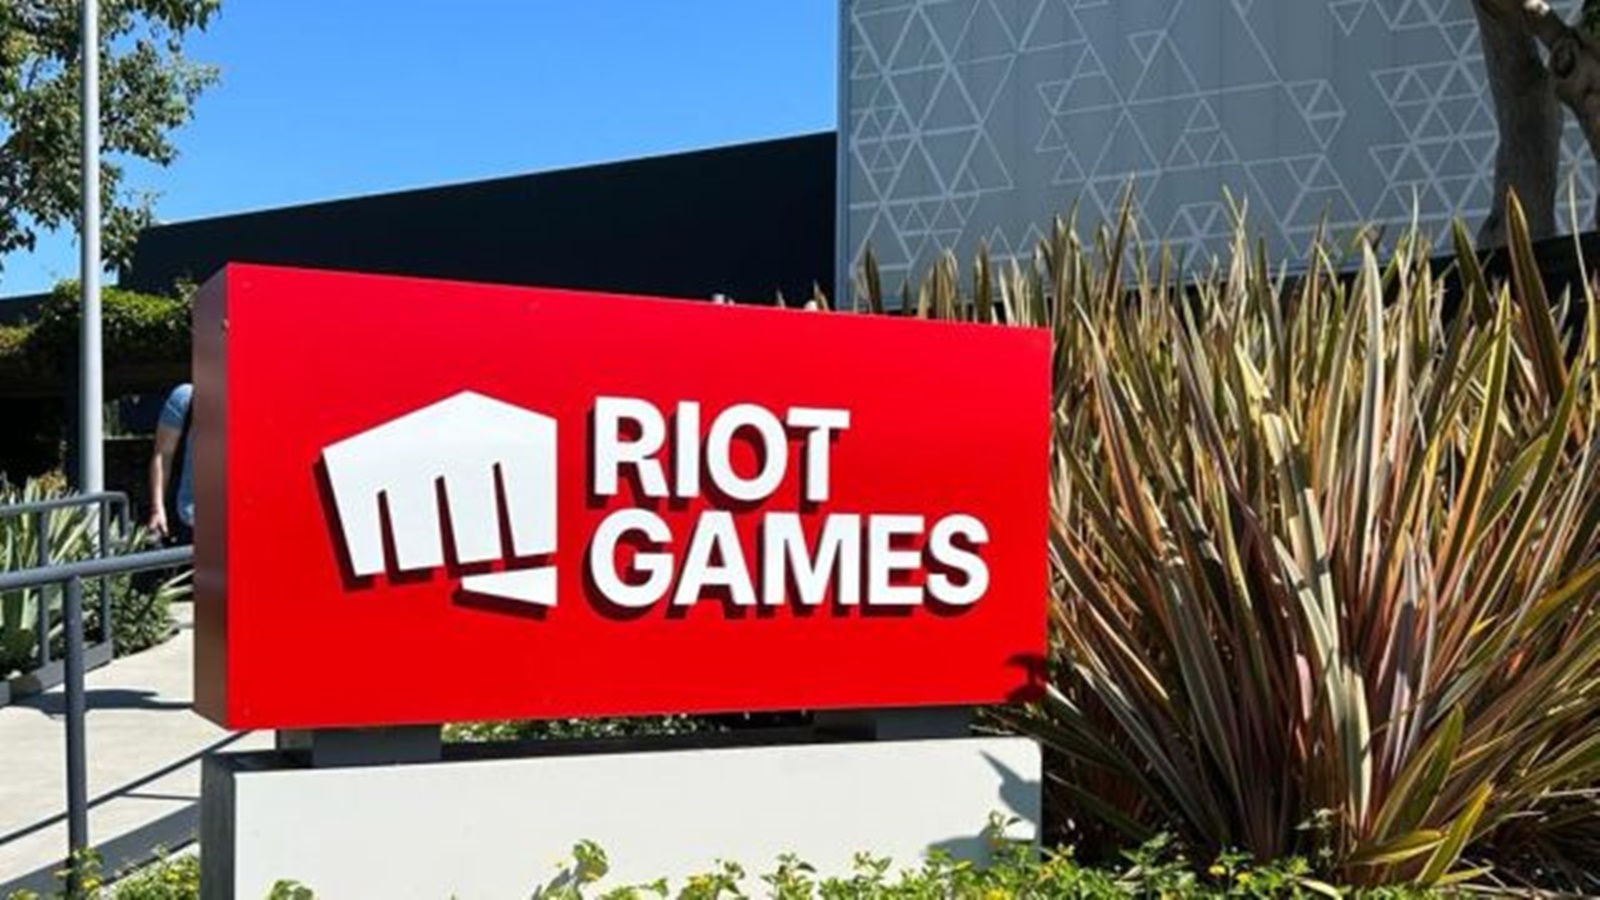 League of Legends' developer Riot Games cuts 11% of its workforce amid  market challenges | Technology News - The Indian Express